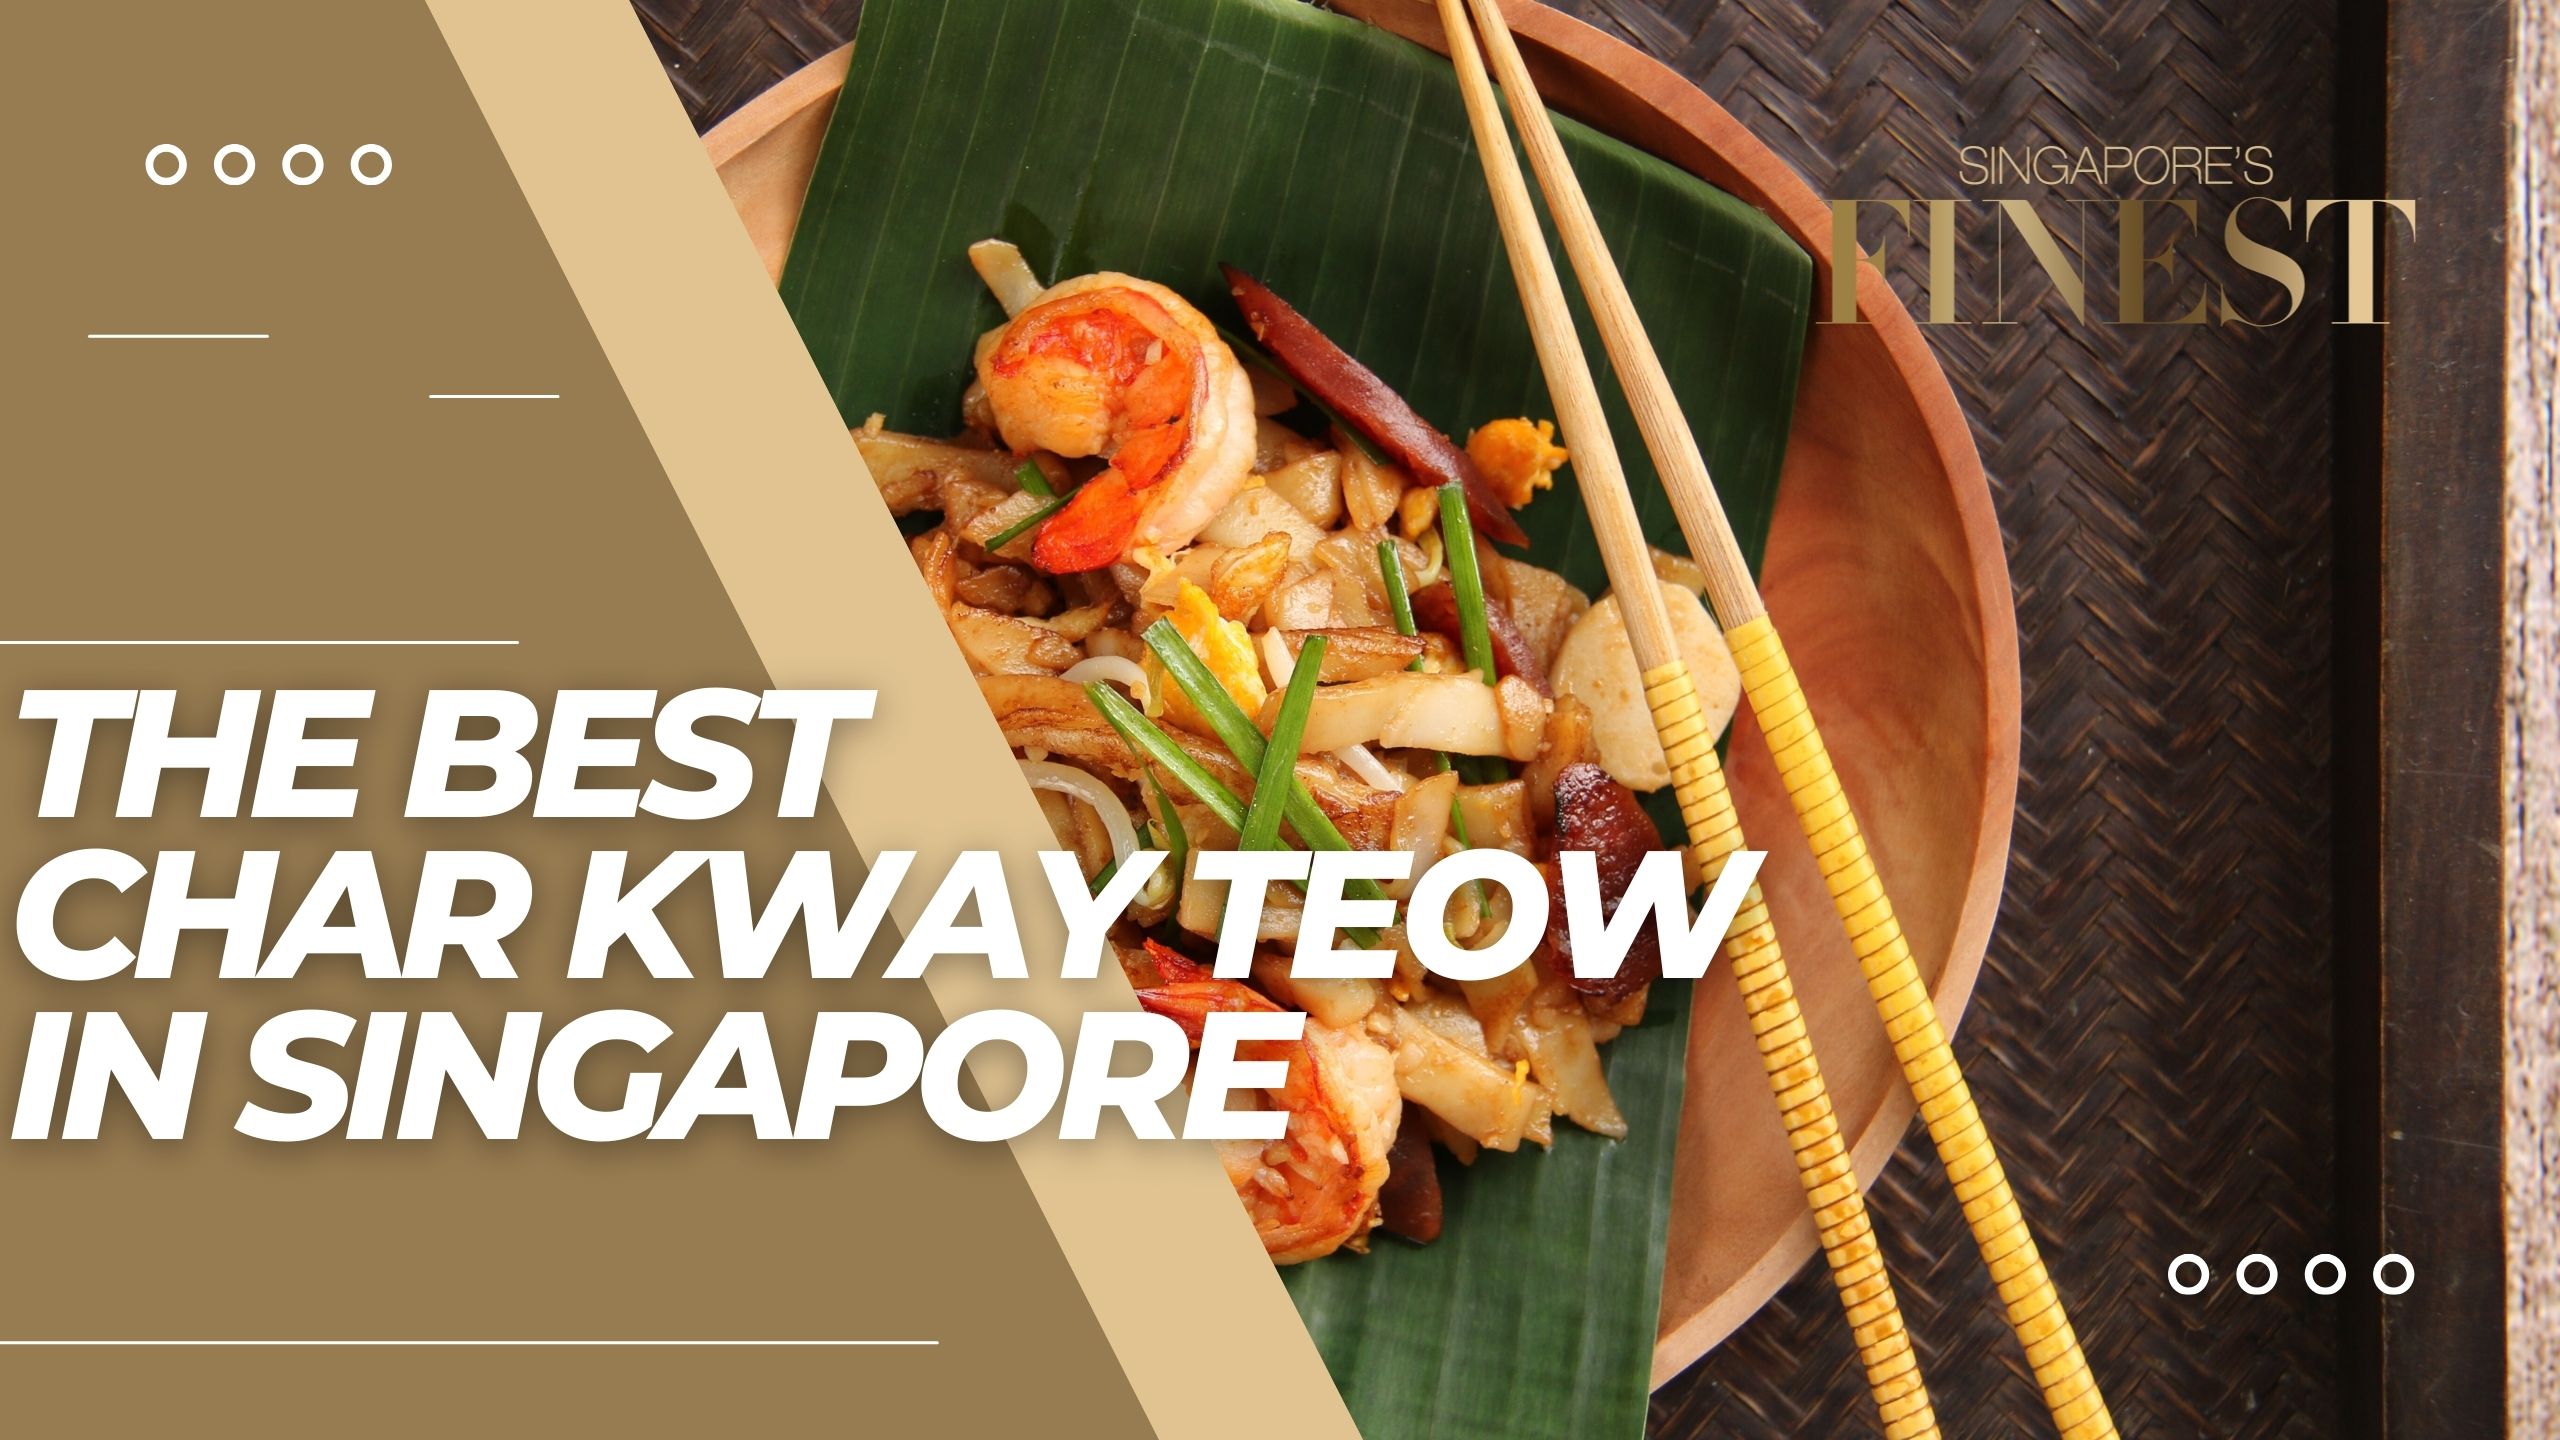 The Finest Char Kway Teow in Singapore